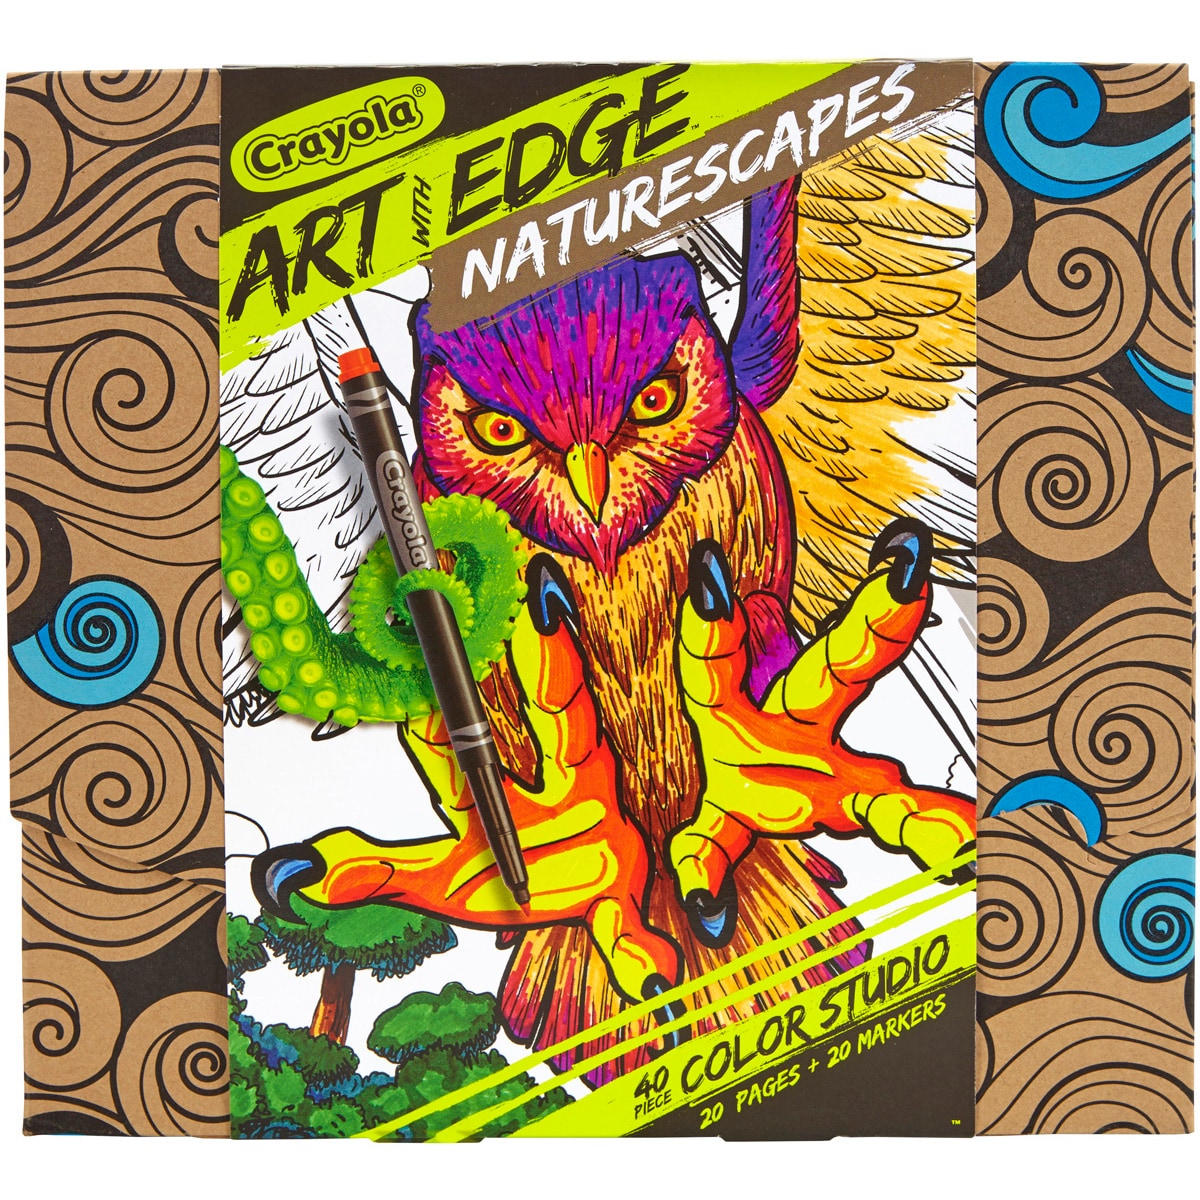 https://ak1.ostkcdn.com/images/products/18893424/Crayola-Art-With-Edge-Coloring-Book-W-Markers-2a1adc1d-18bb-46da-a8bc-c77df45d2612.jpg